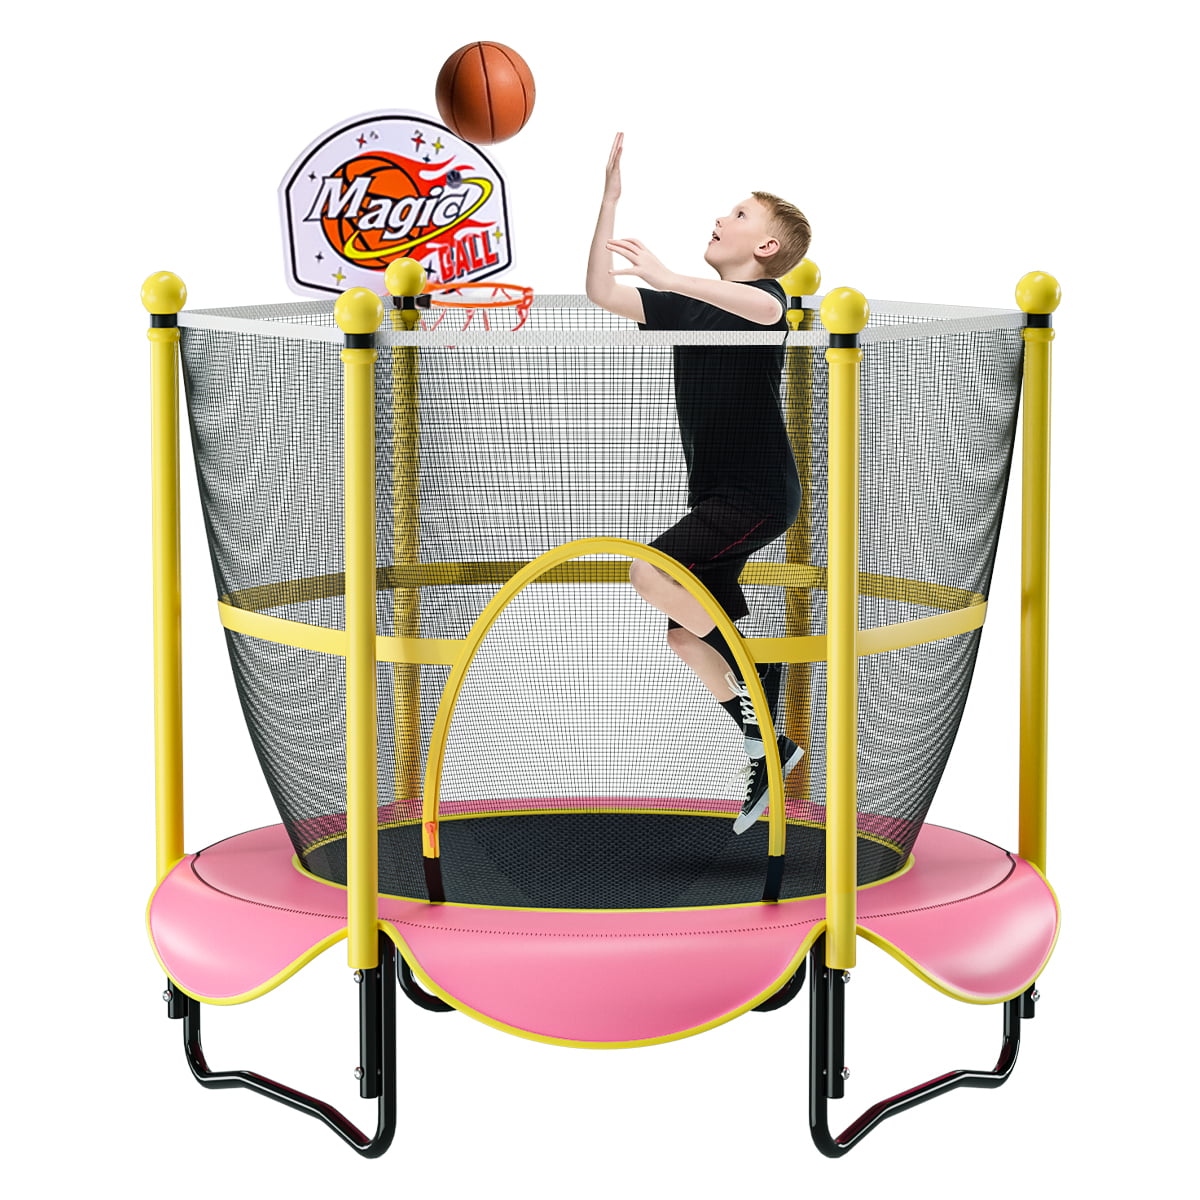 5FT Kids Mini Jumping Round Trampoline Exercise W/ Safety Pad Enclosure Combo US 